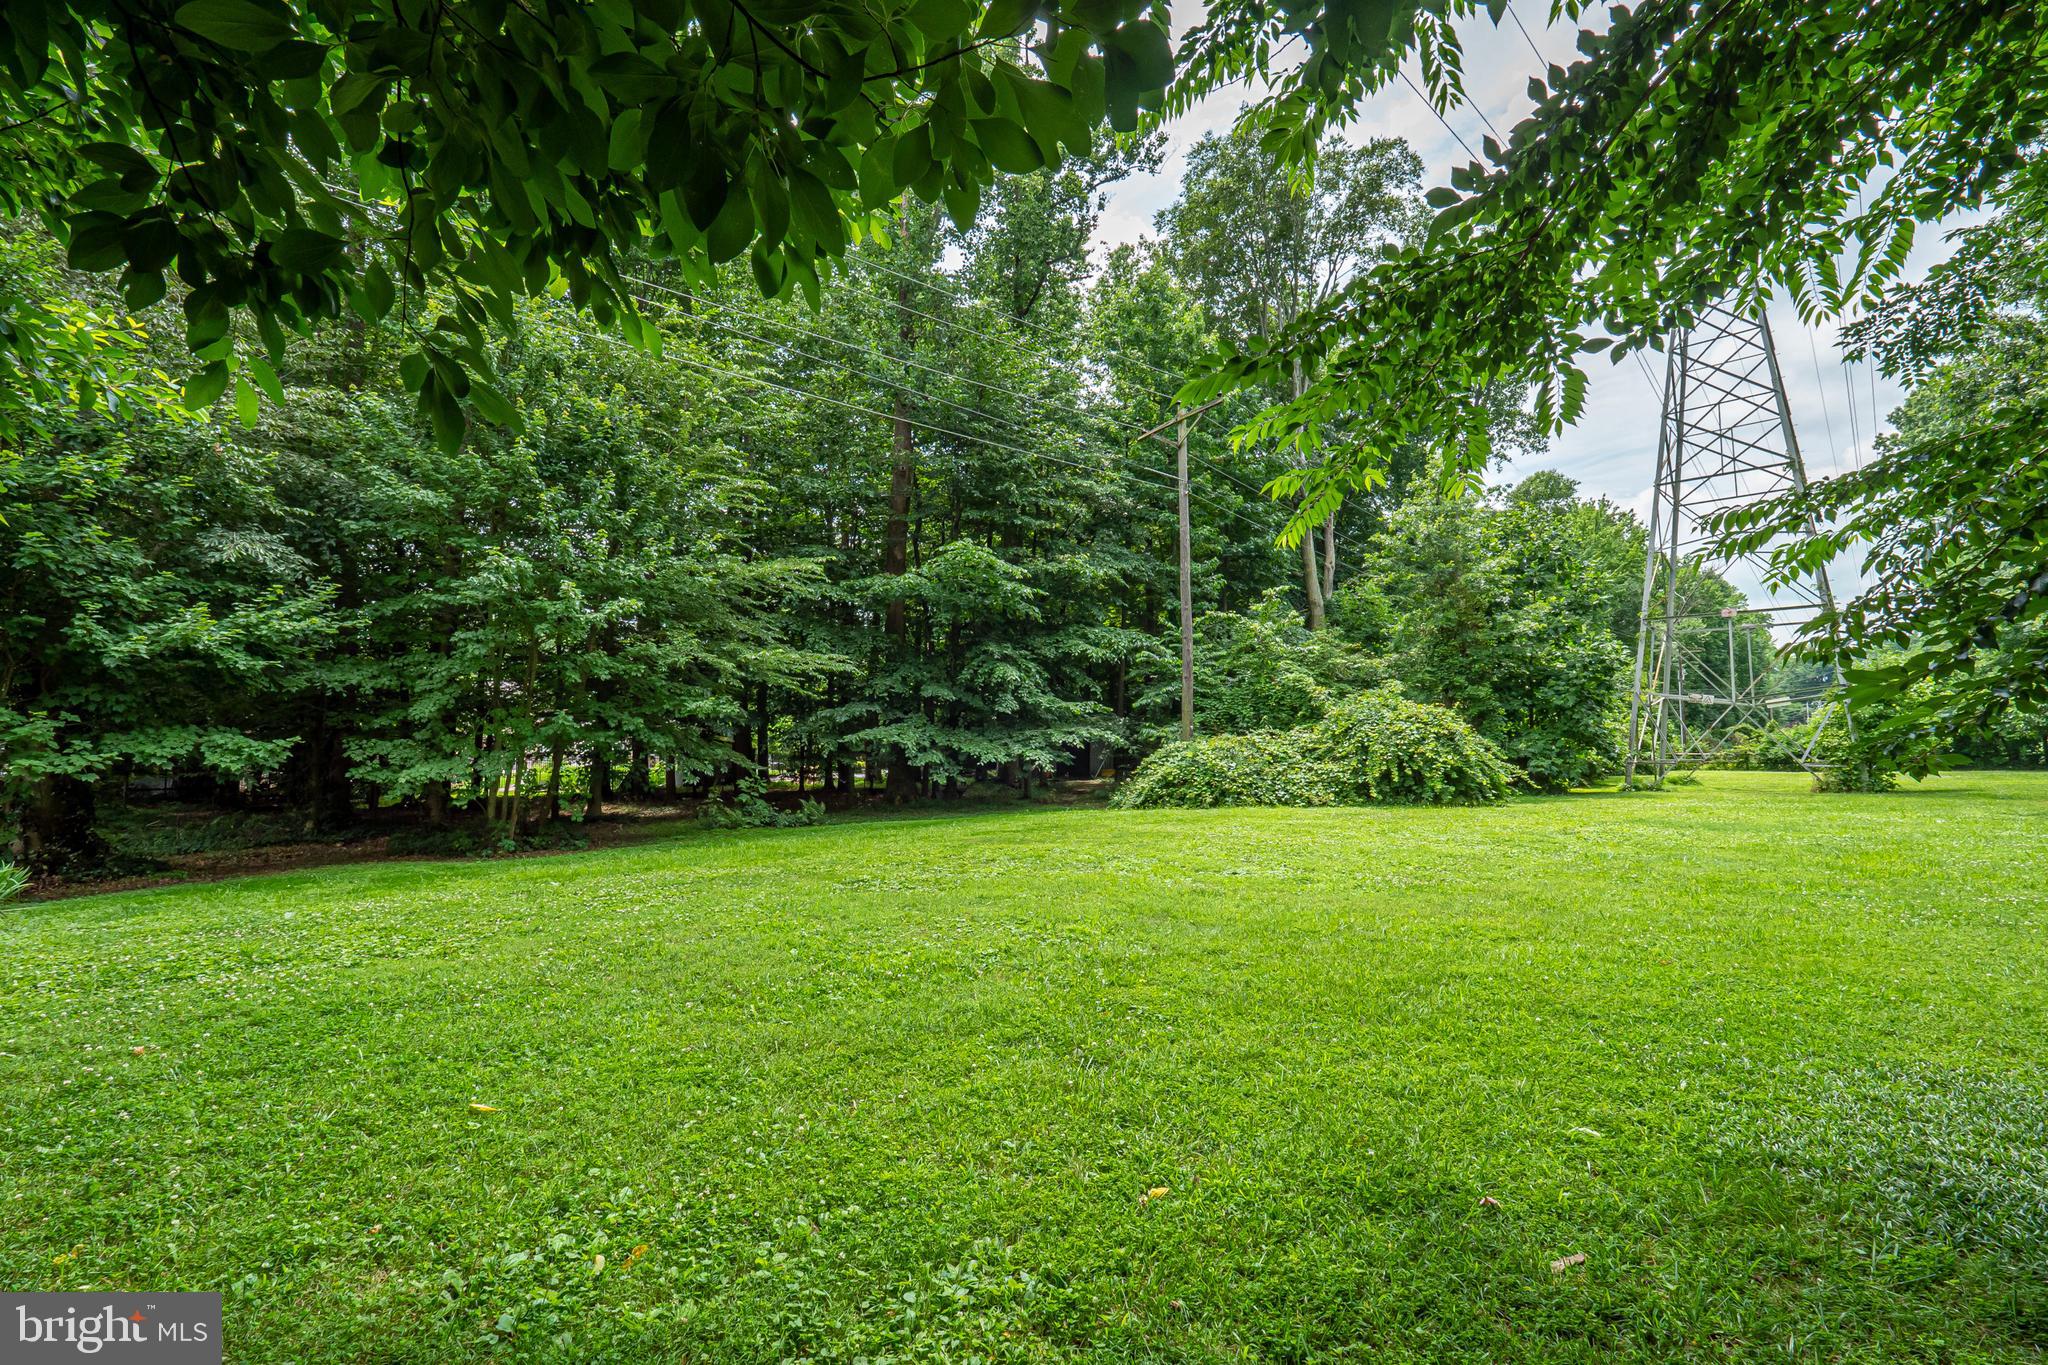 a view of a big yard with plants and large trees